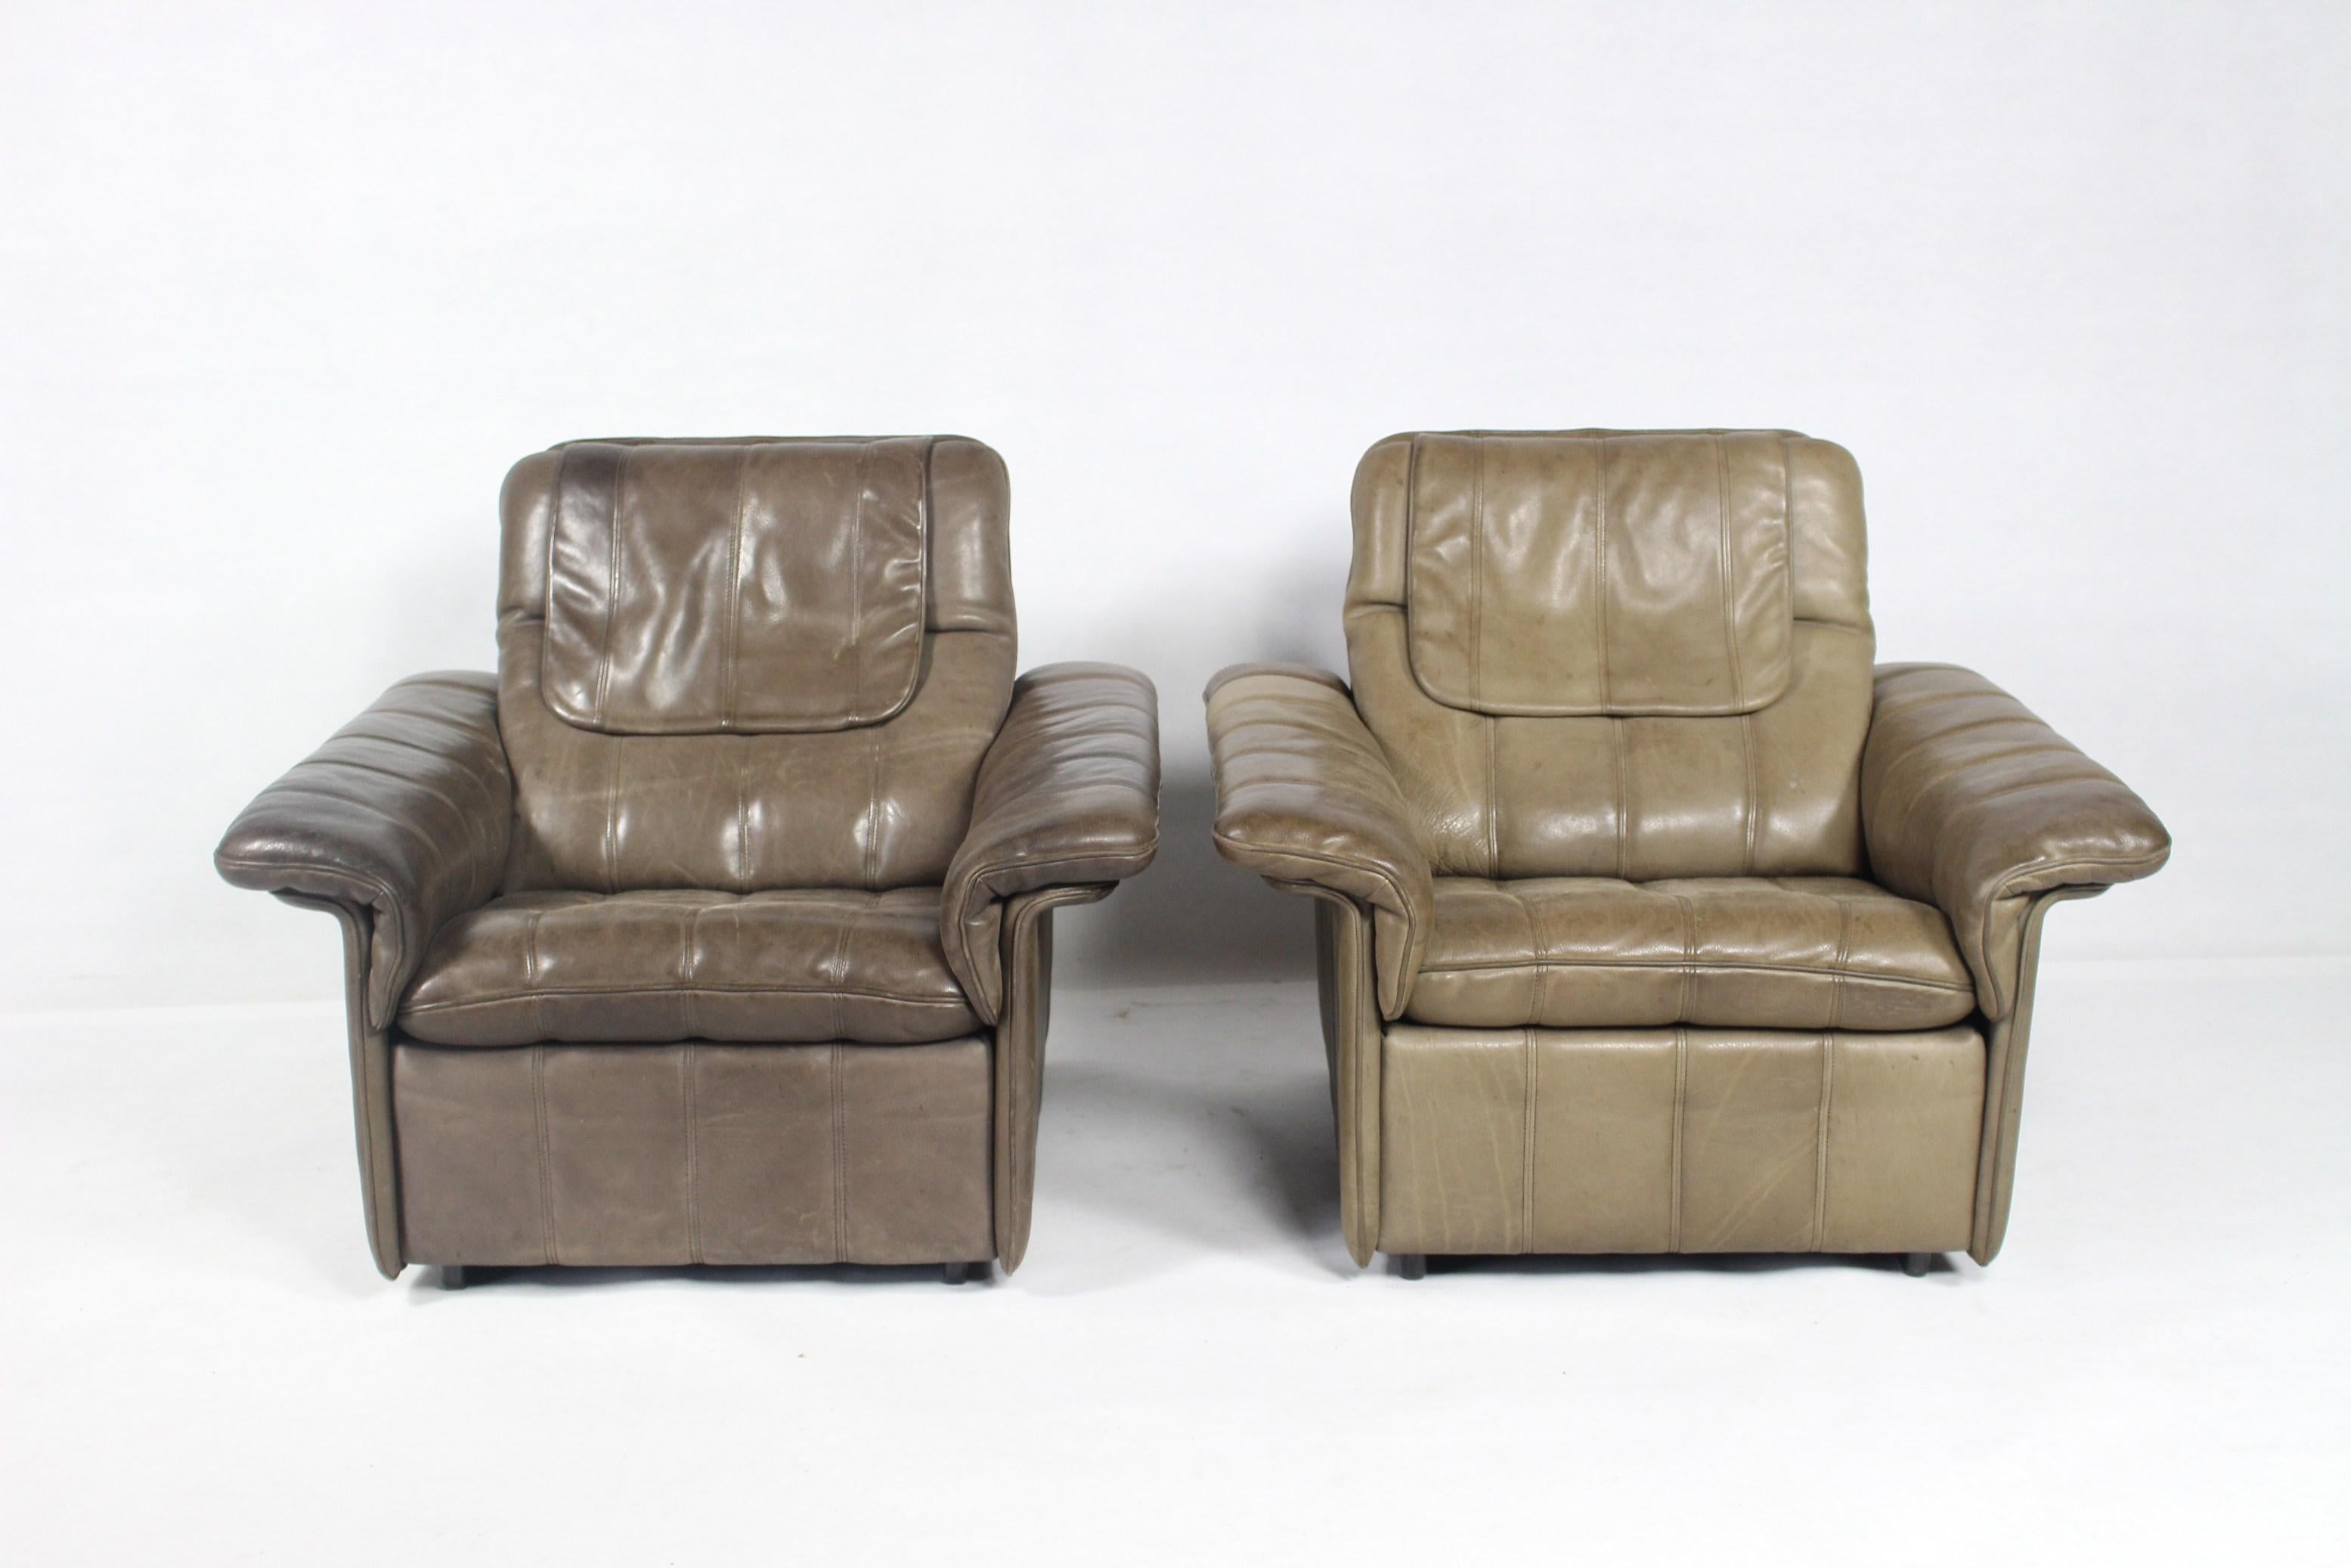 De Sede buffalo leather, Switzerland, 1970s.
Brown thick neckleather with light stitching.
Vintage condition.
Price for 1 chair available 2 chairs.